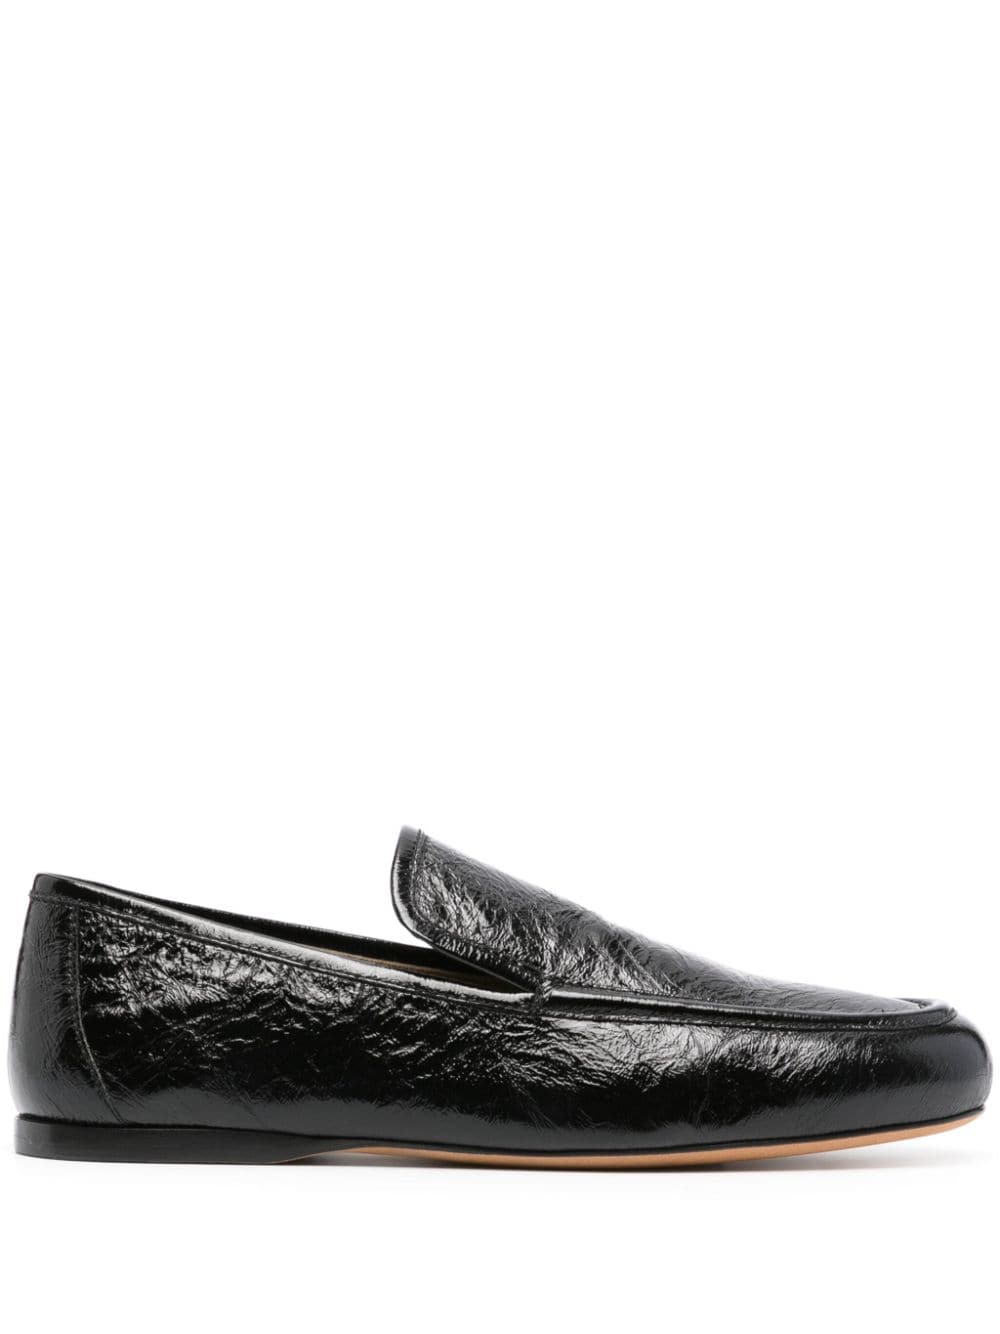 KHAITE THE ALESSIA CRINKLED LOAFERS